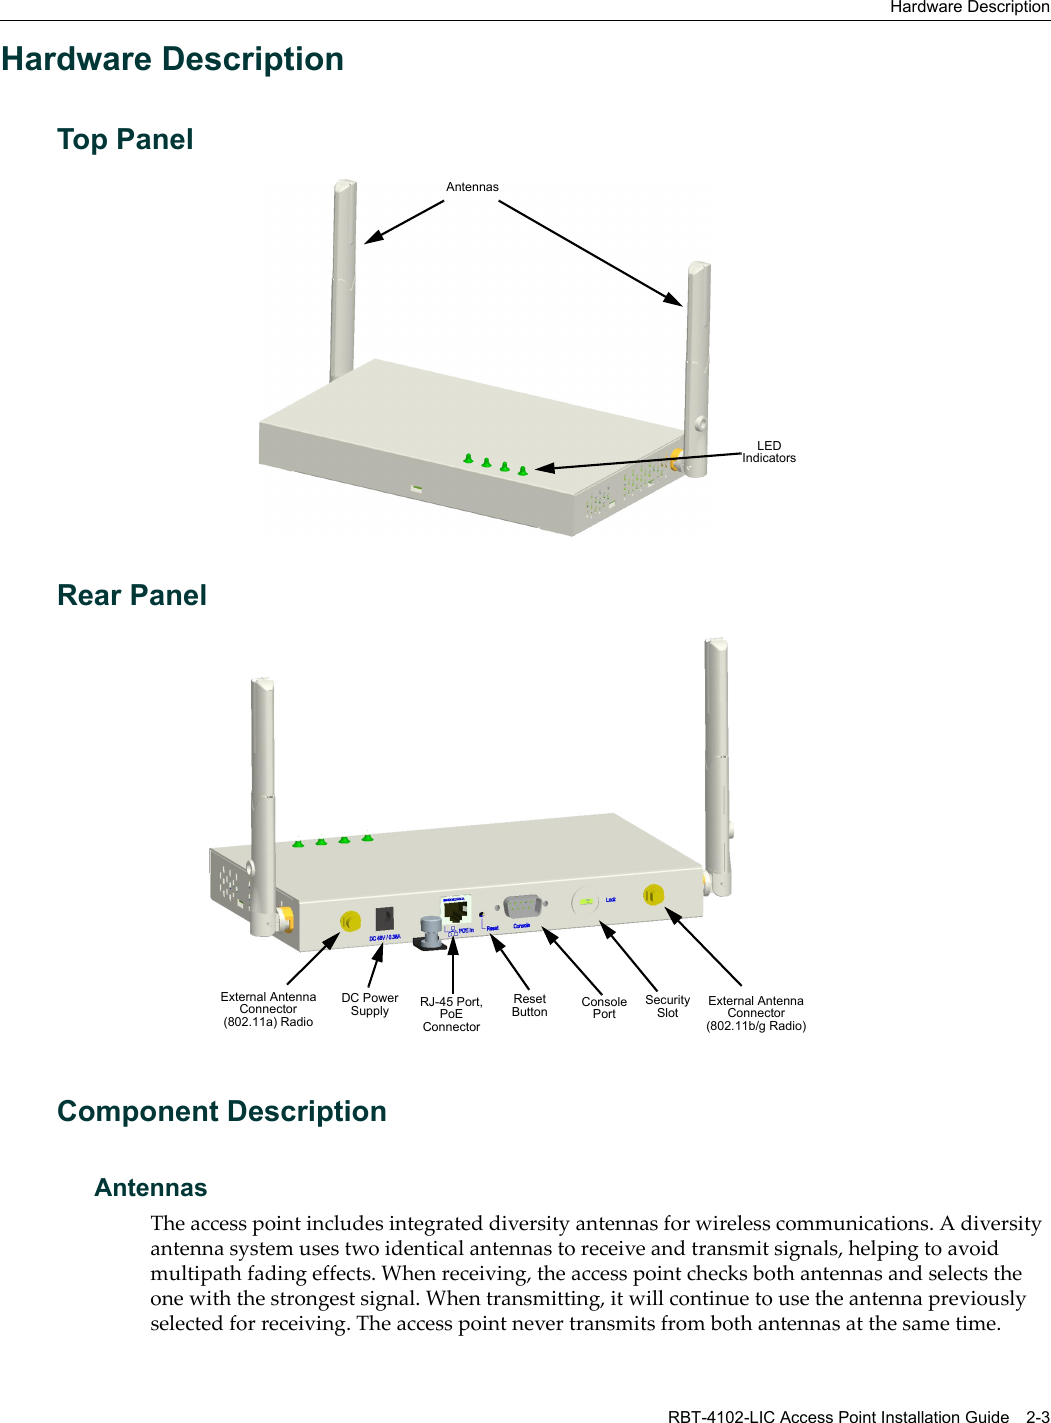 Hardware DescriptionRBT-4102-LIC Access Point Installation Guide 2-3Hardware DescriptionTop PanelRear PanelComponent DescriptionAntennasTheaccesspointincludesintegrateddiversityantennasforwirelesscommunications.Adiversityantennasystemusestwoidenticalantennastoreceiveandtransmitsignals,helpingtoavoidmultipathfadingeffects.Whenreceiving,theaccesspointchecksbothantennasandselectstheonewiththestrongestsignal.Whentransmitting,itwillcontinuetousetheantennapreviouslyselectedforreceiving.Theaccesspointnevertransmitsfrombothantennasatthesametime.LED IndicatorsAntennasSecurity SlotConsole PortRJ-45 Port,PoE ConnectorReset Button External Antenna Connector (802.11b/g Radio)DC Power SupplyExternal Antenna Connector (802.11a) Radio